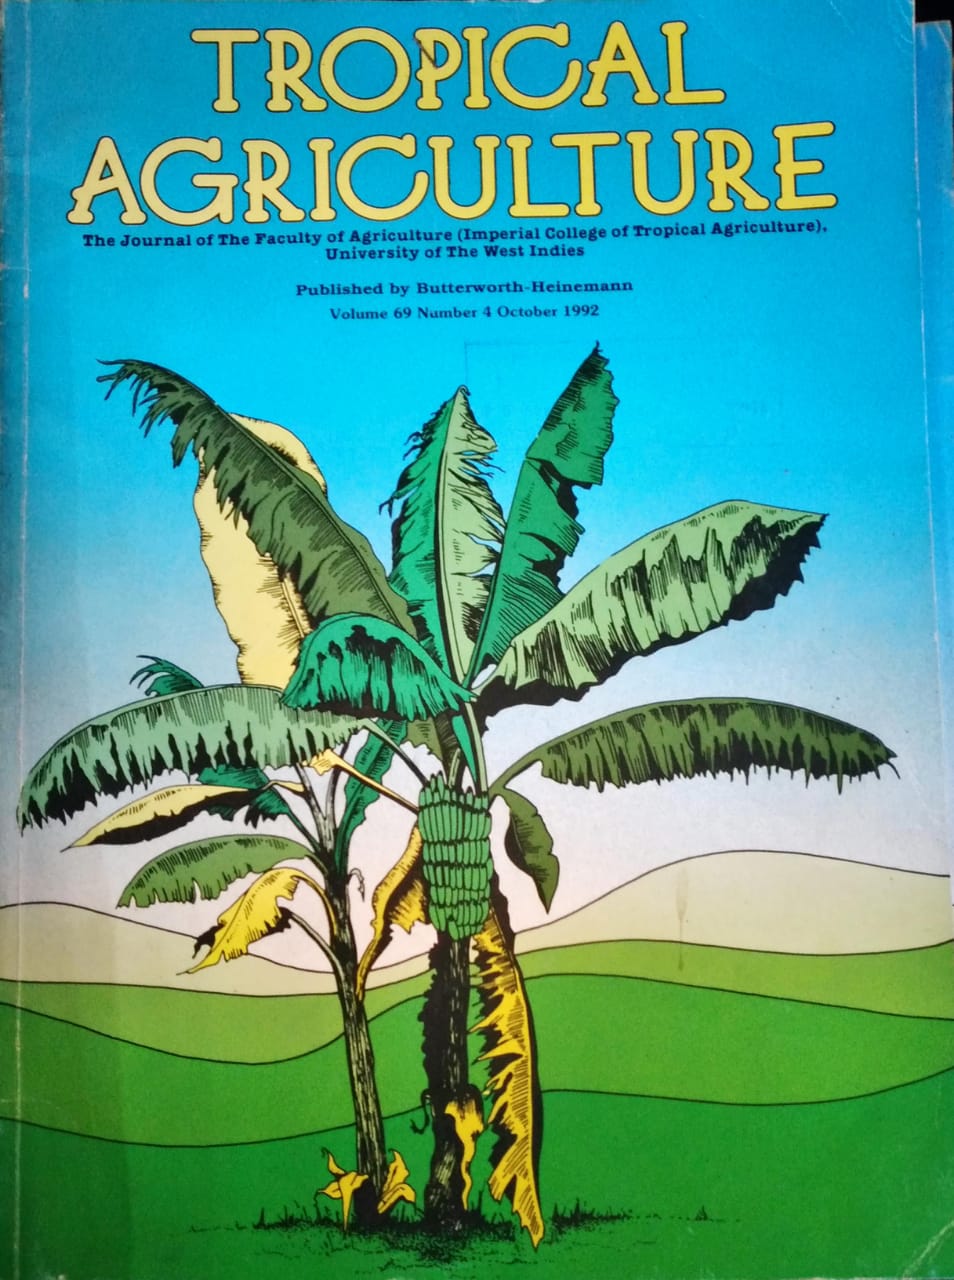 TROPICAL AGRICULTURE. THE JOURNAL OF THE FACULTY OF AGRICULTURE (IMPERIAL COLLEGE OF TROPICAL AGRICULTURE), UNIVERSITY OF THE WEST INDIES. VOL. 69 (4), OCTOBER 1992